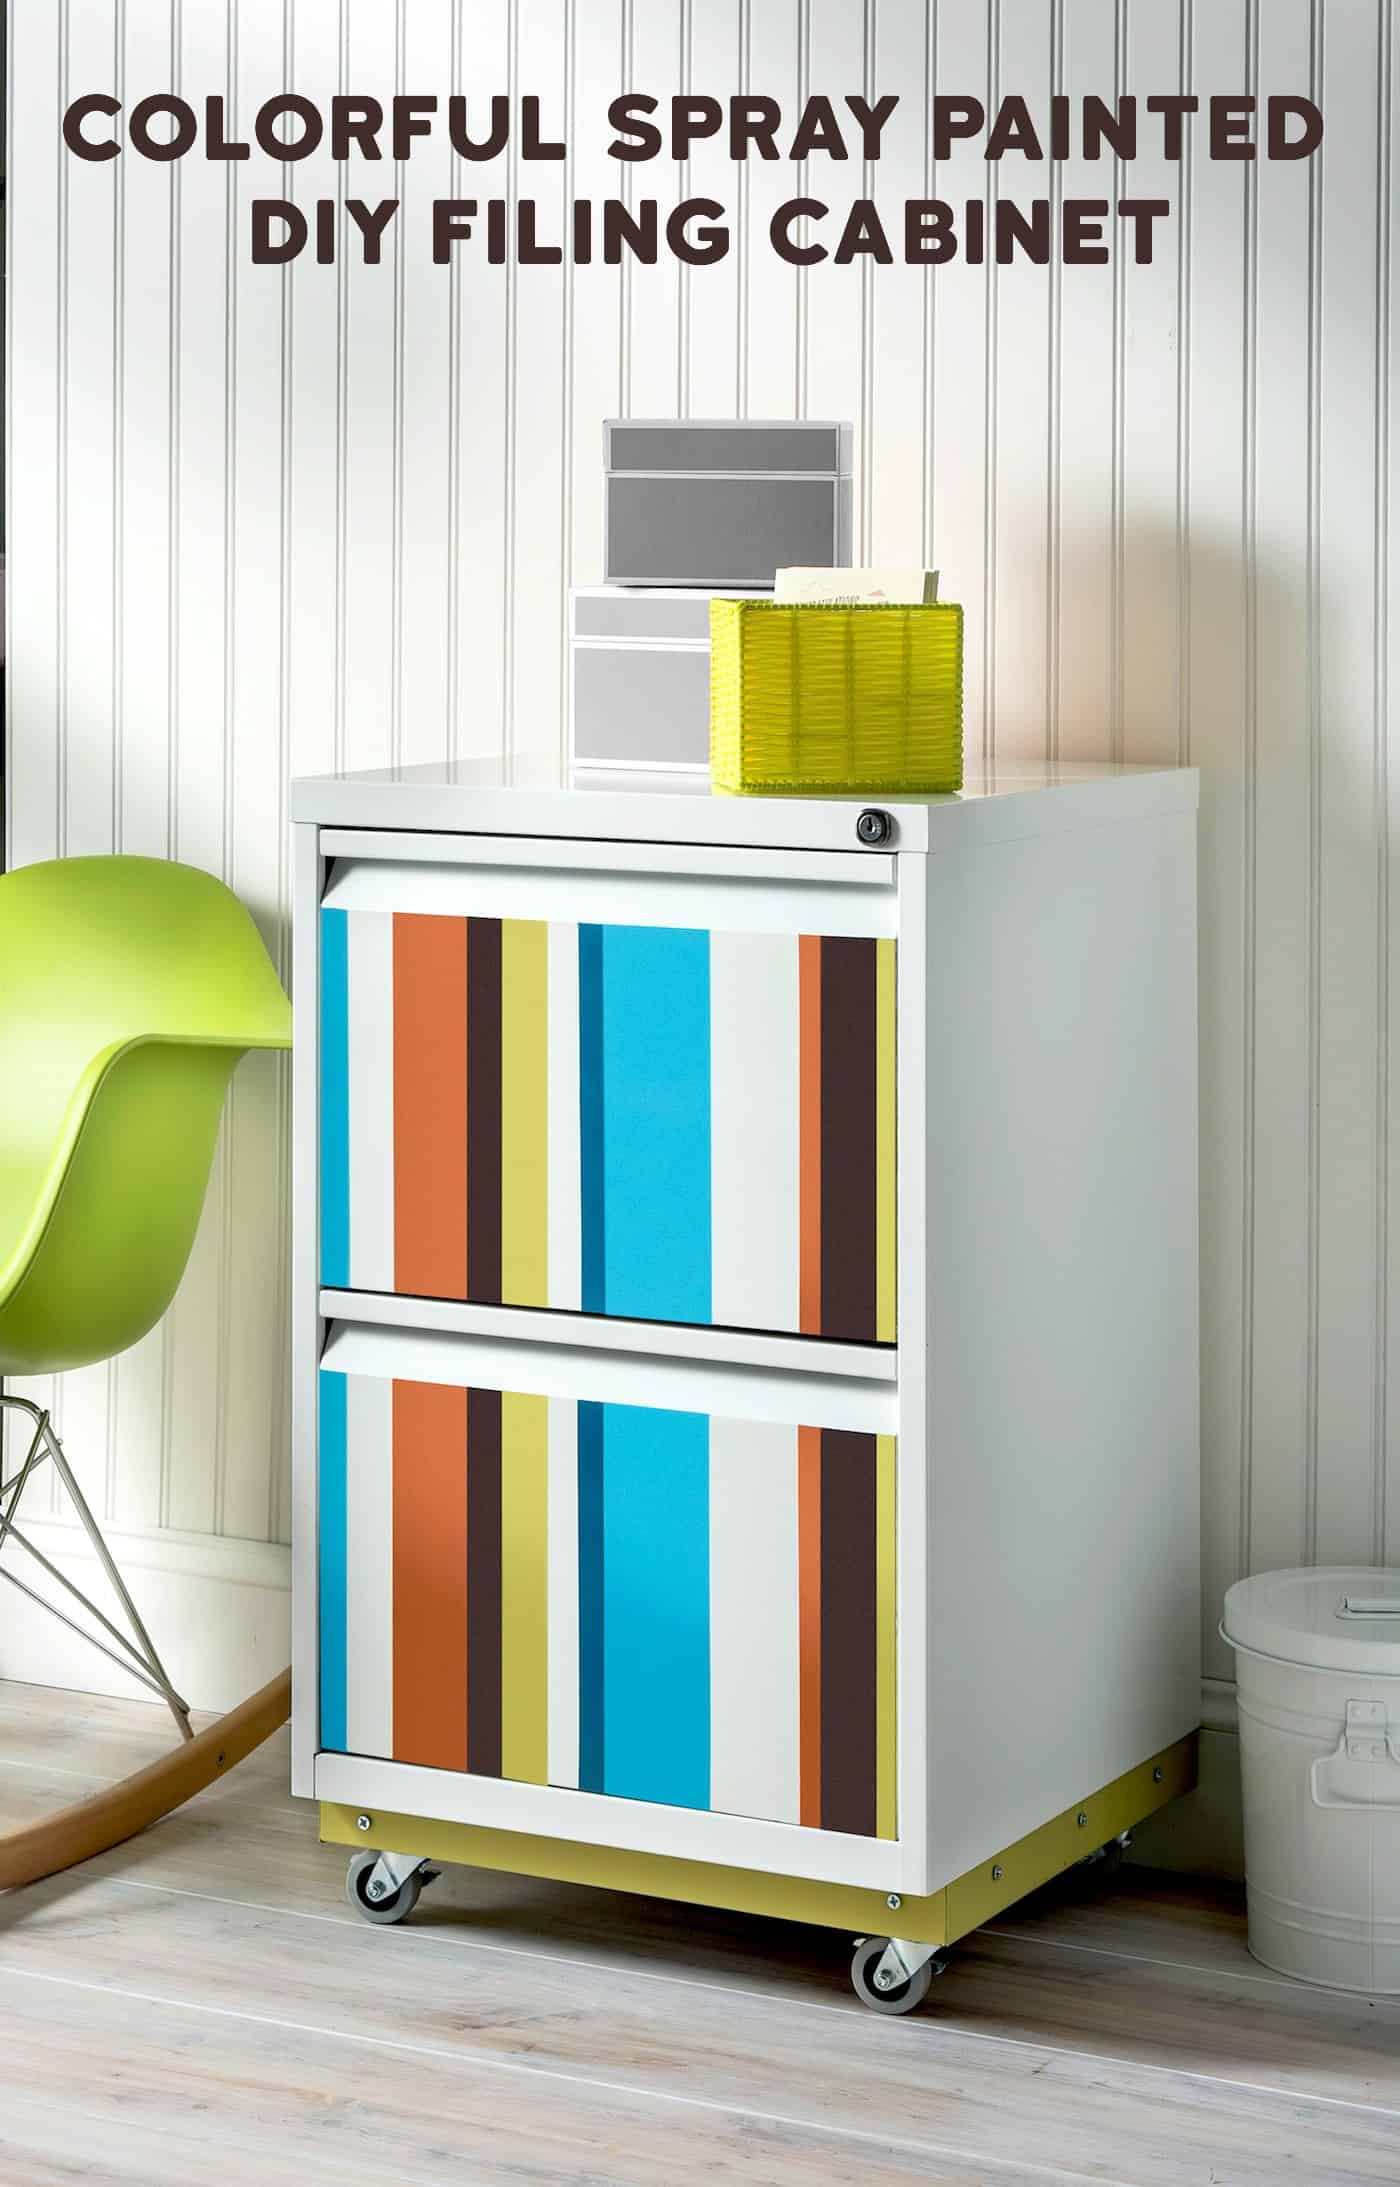 In this easy DIY file cabinet revamp, we took a thrift store find and made it over with existing spray paint. The whole project cost less than $10! If you want to add wheels - I'll show you how to do that too. Click through to see!